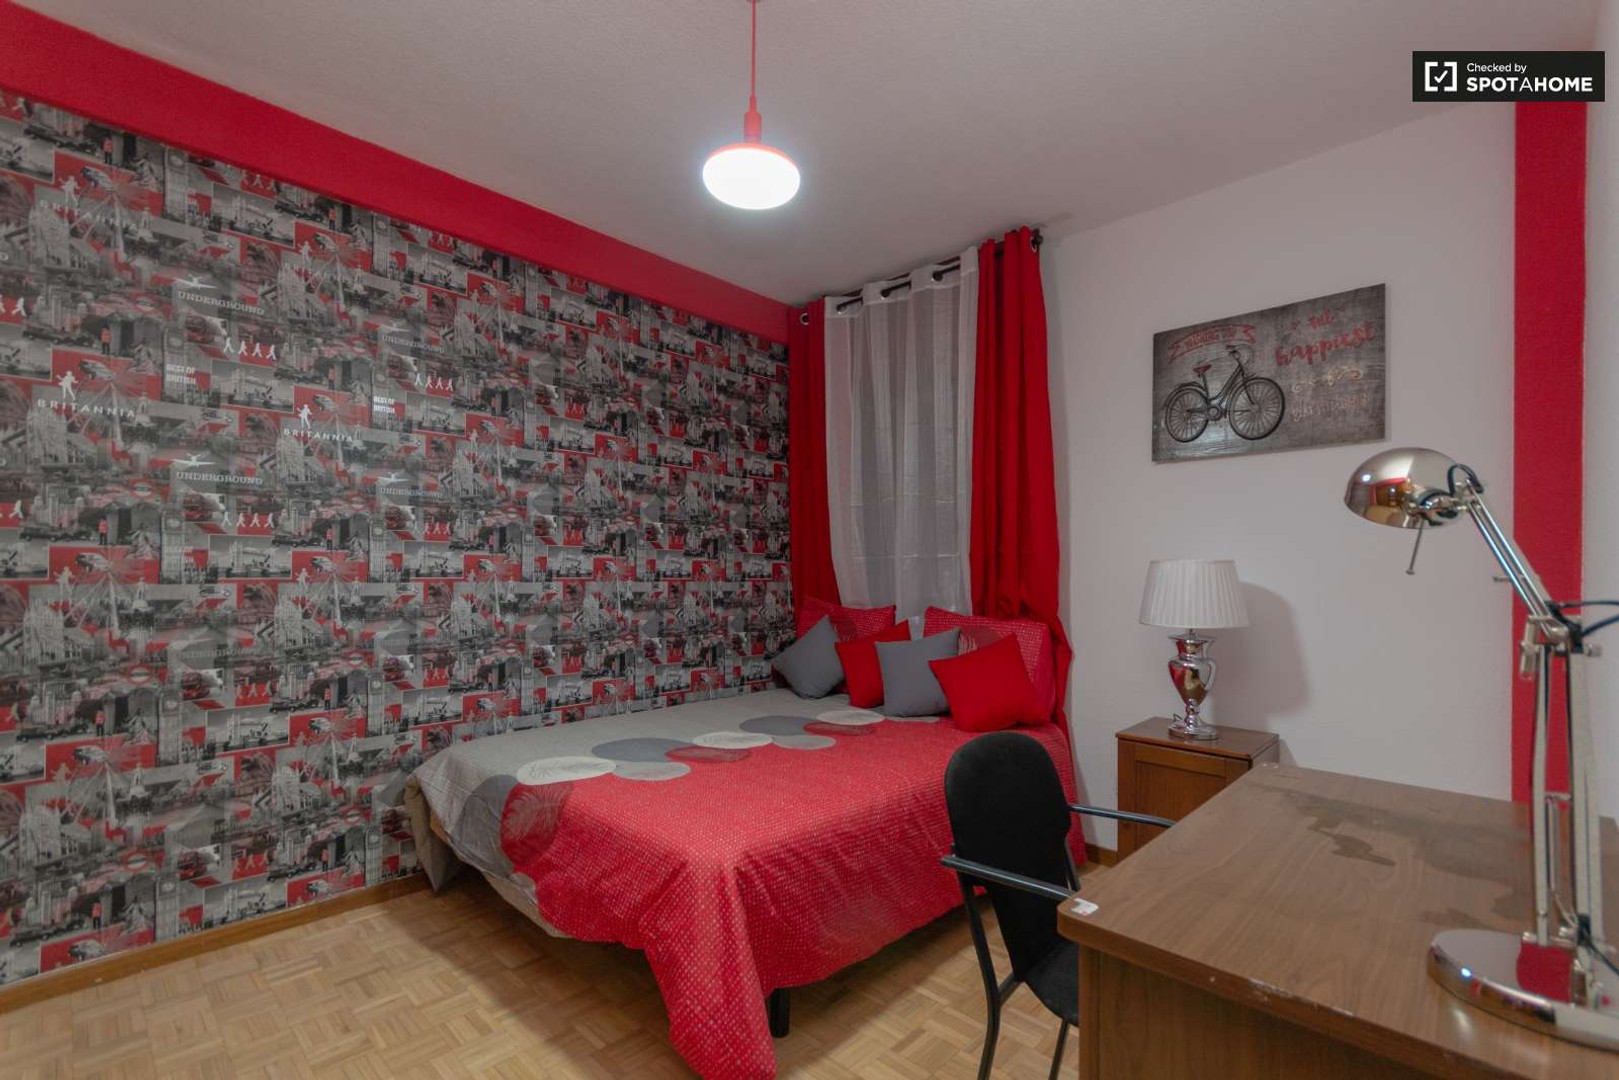 Renting rooms by the month in alcala-de-henares